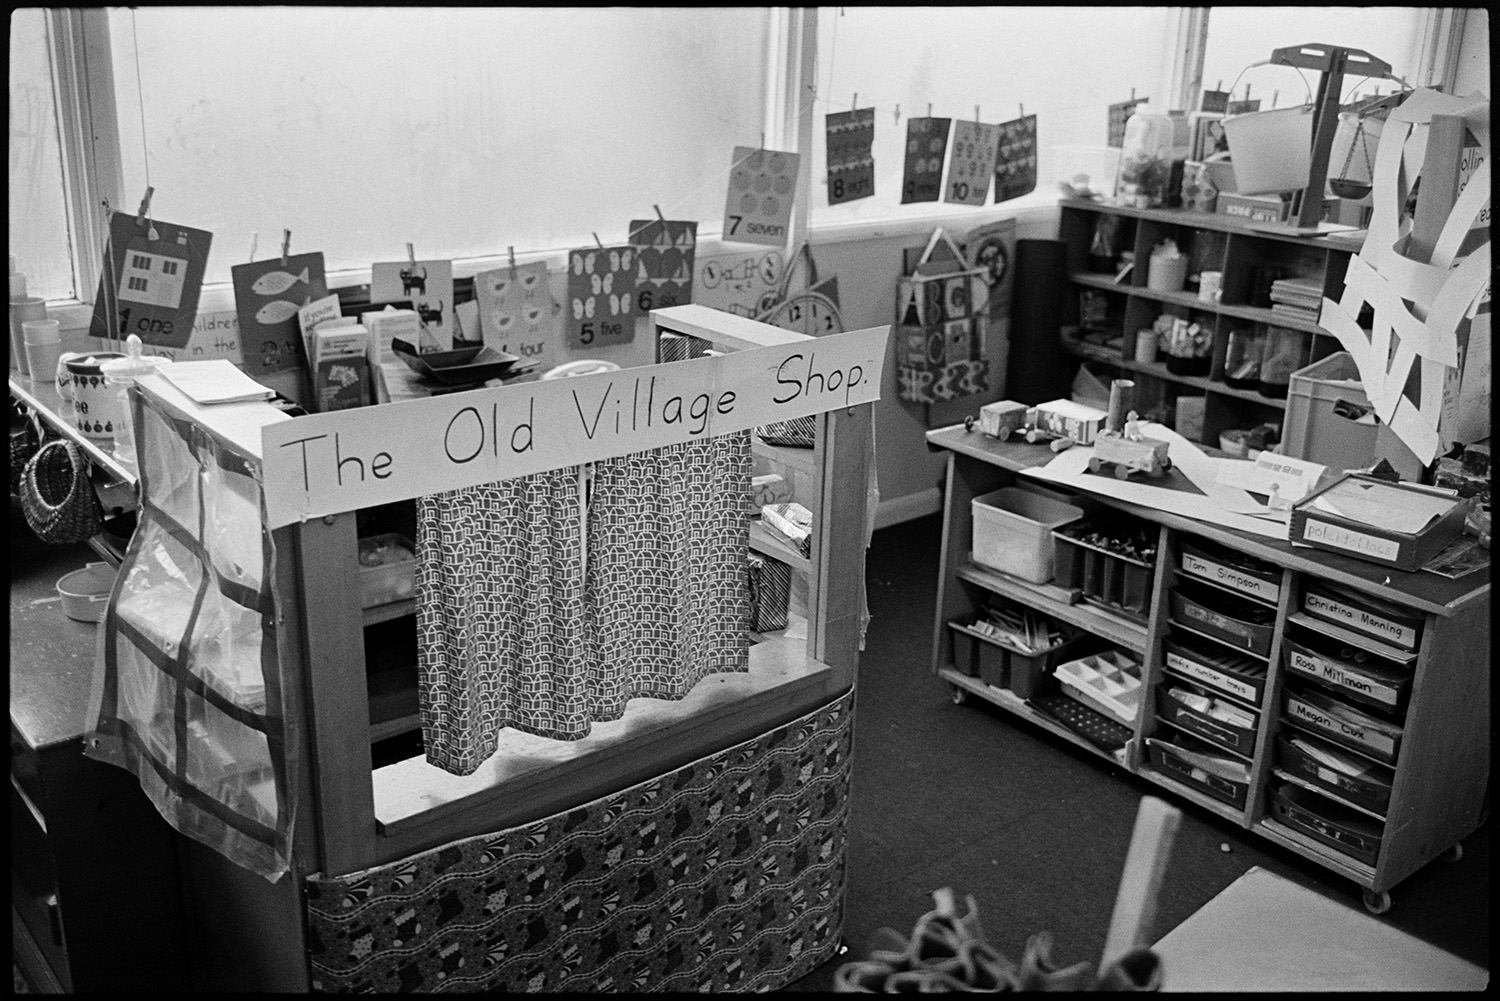 Children in primary school prefab classroom, before move to new school. 
[A classroom in a porta cabin at Chulmleigh Primary School. A small playhouse with a sign reading 'The Old Village Shop' is visible, along with a display of children's artwork and pupils' book trays.]